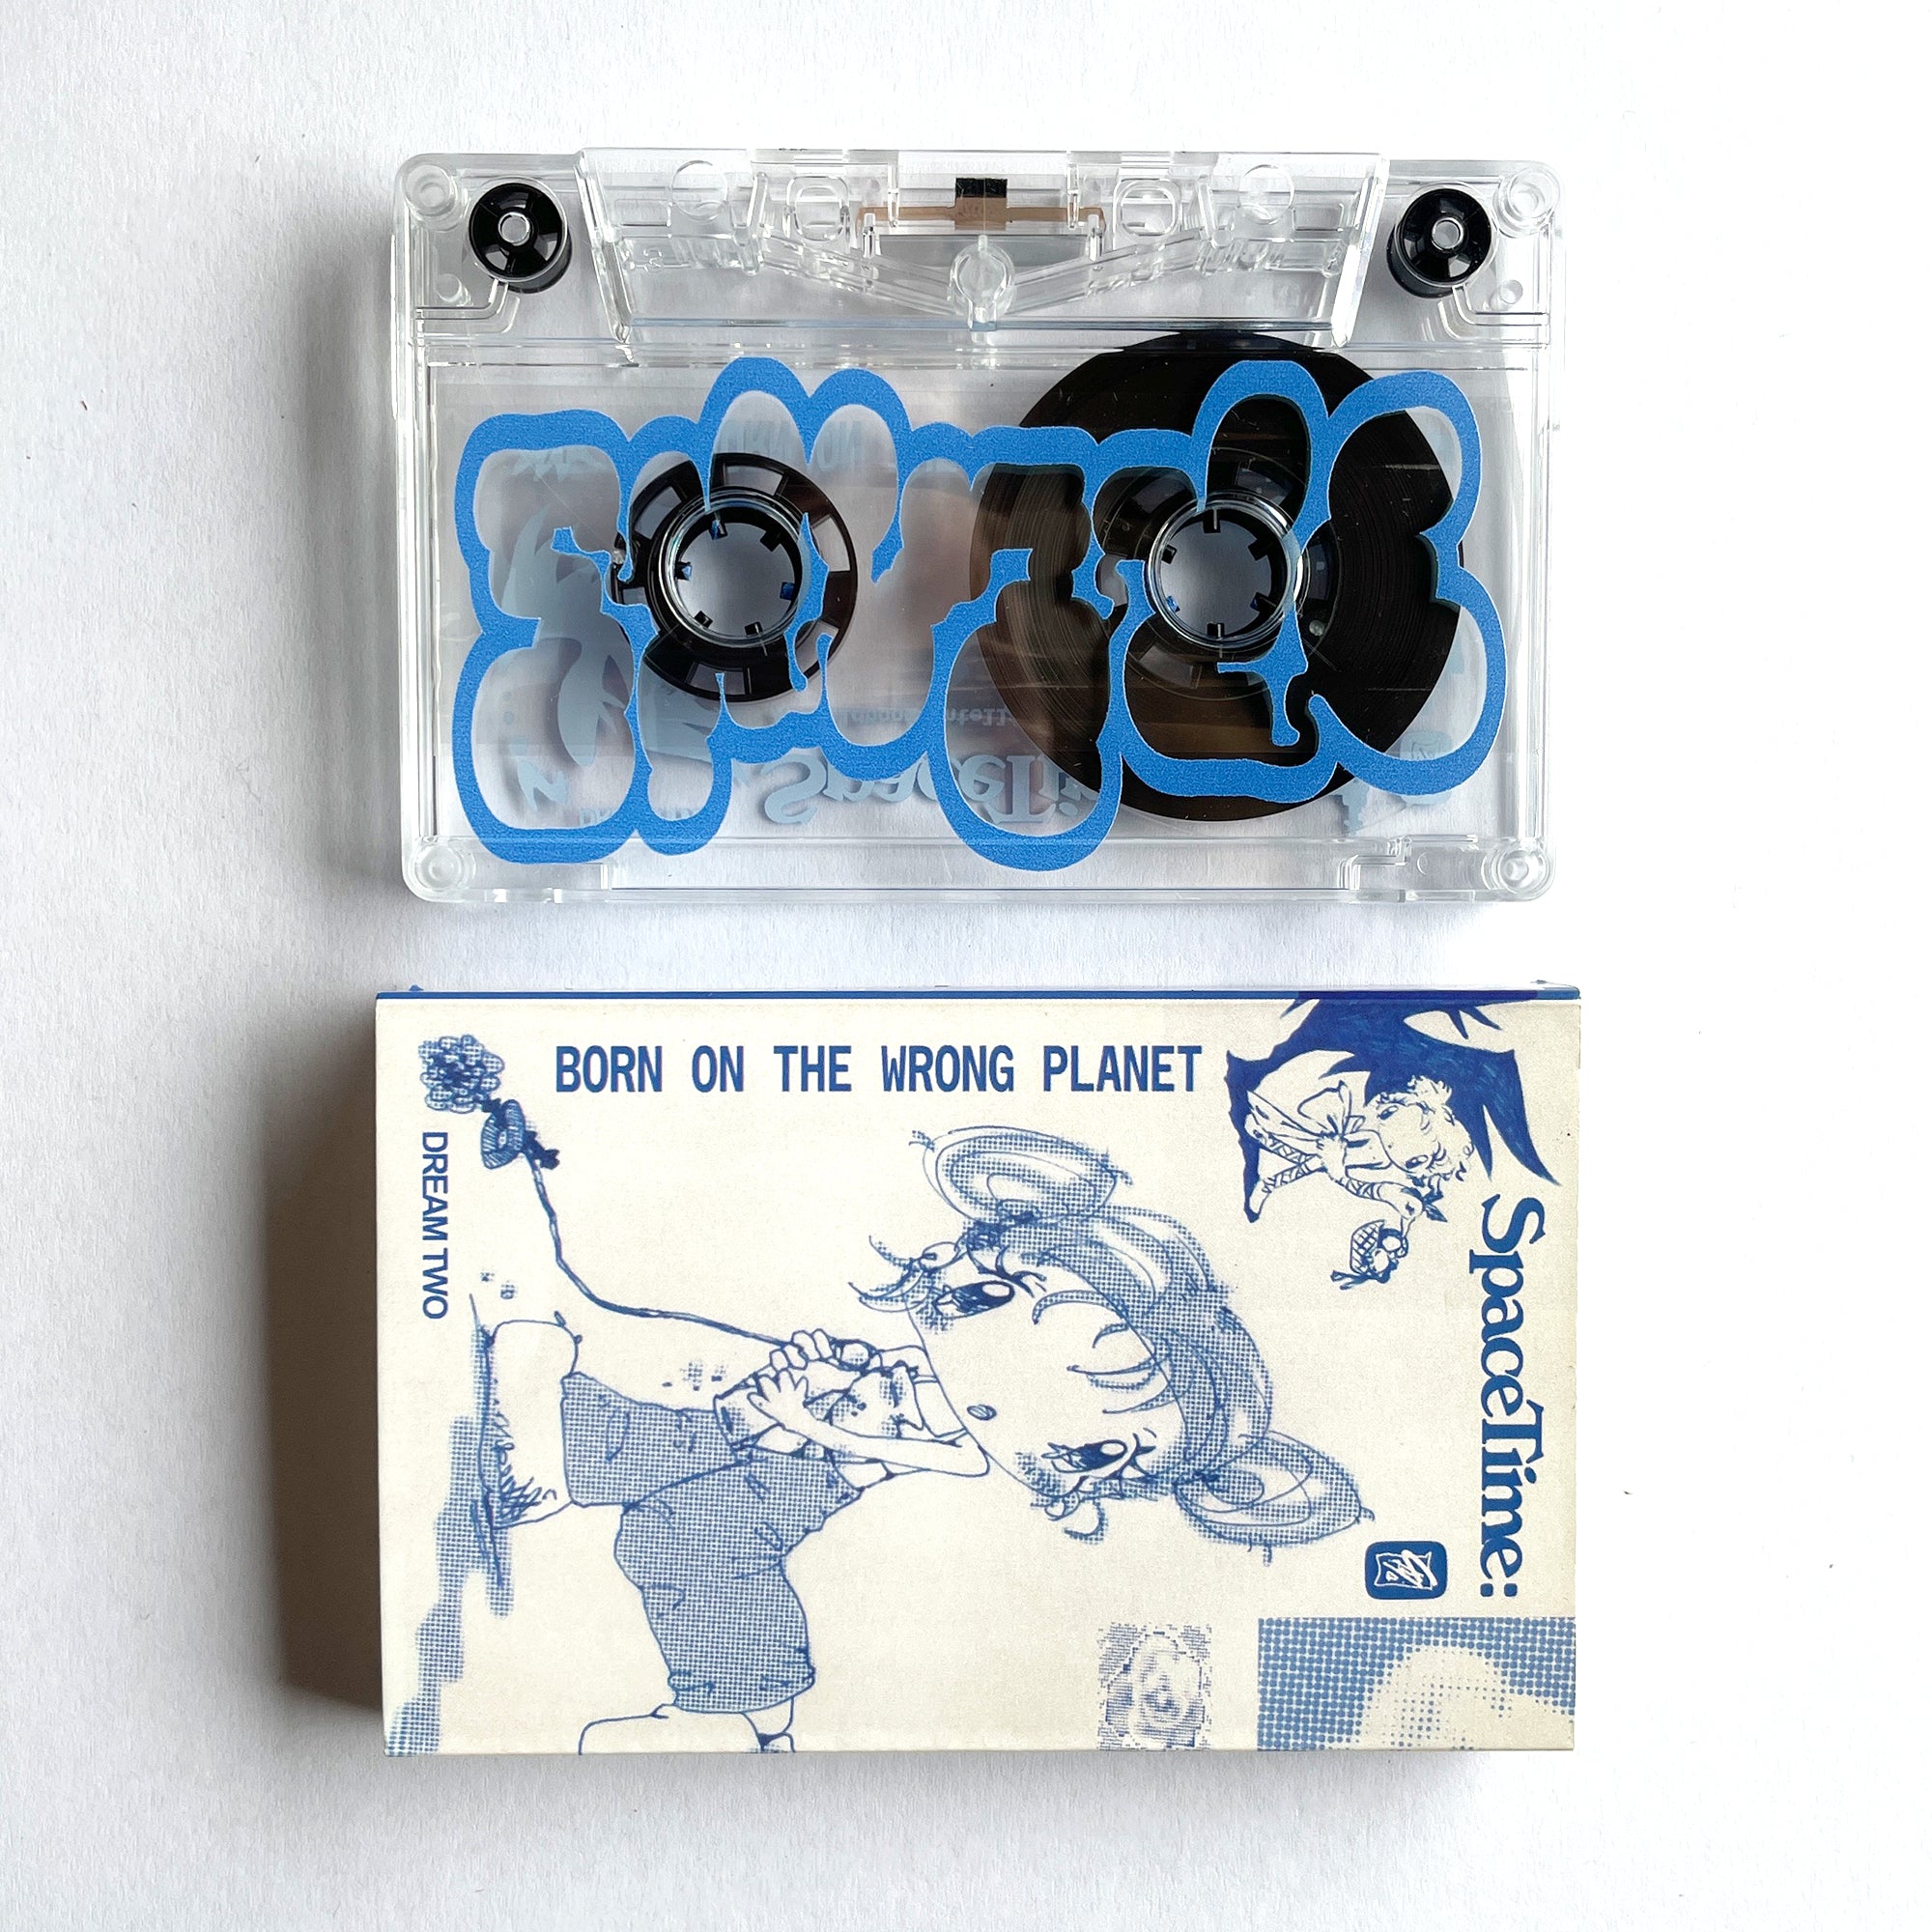 SpaceTime - "Born On The Wrong Planet" / Cassette Tape